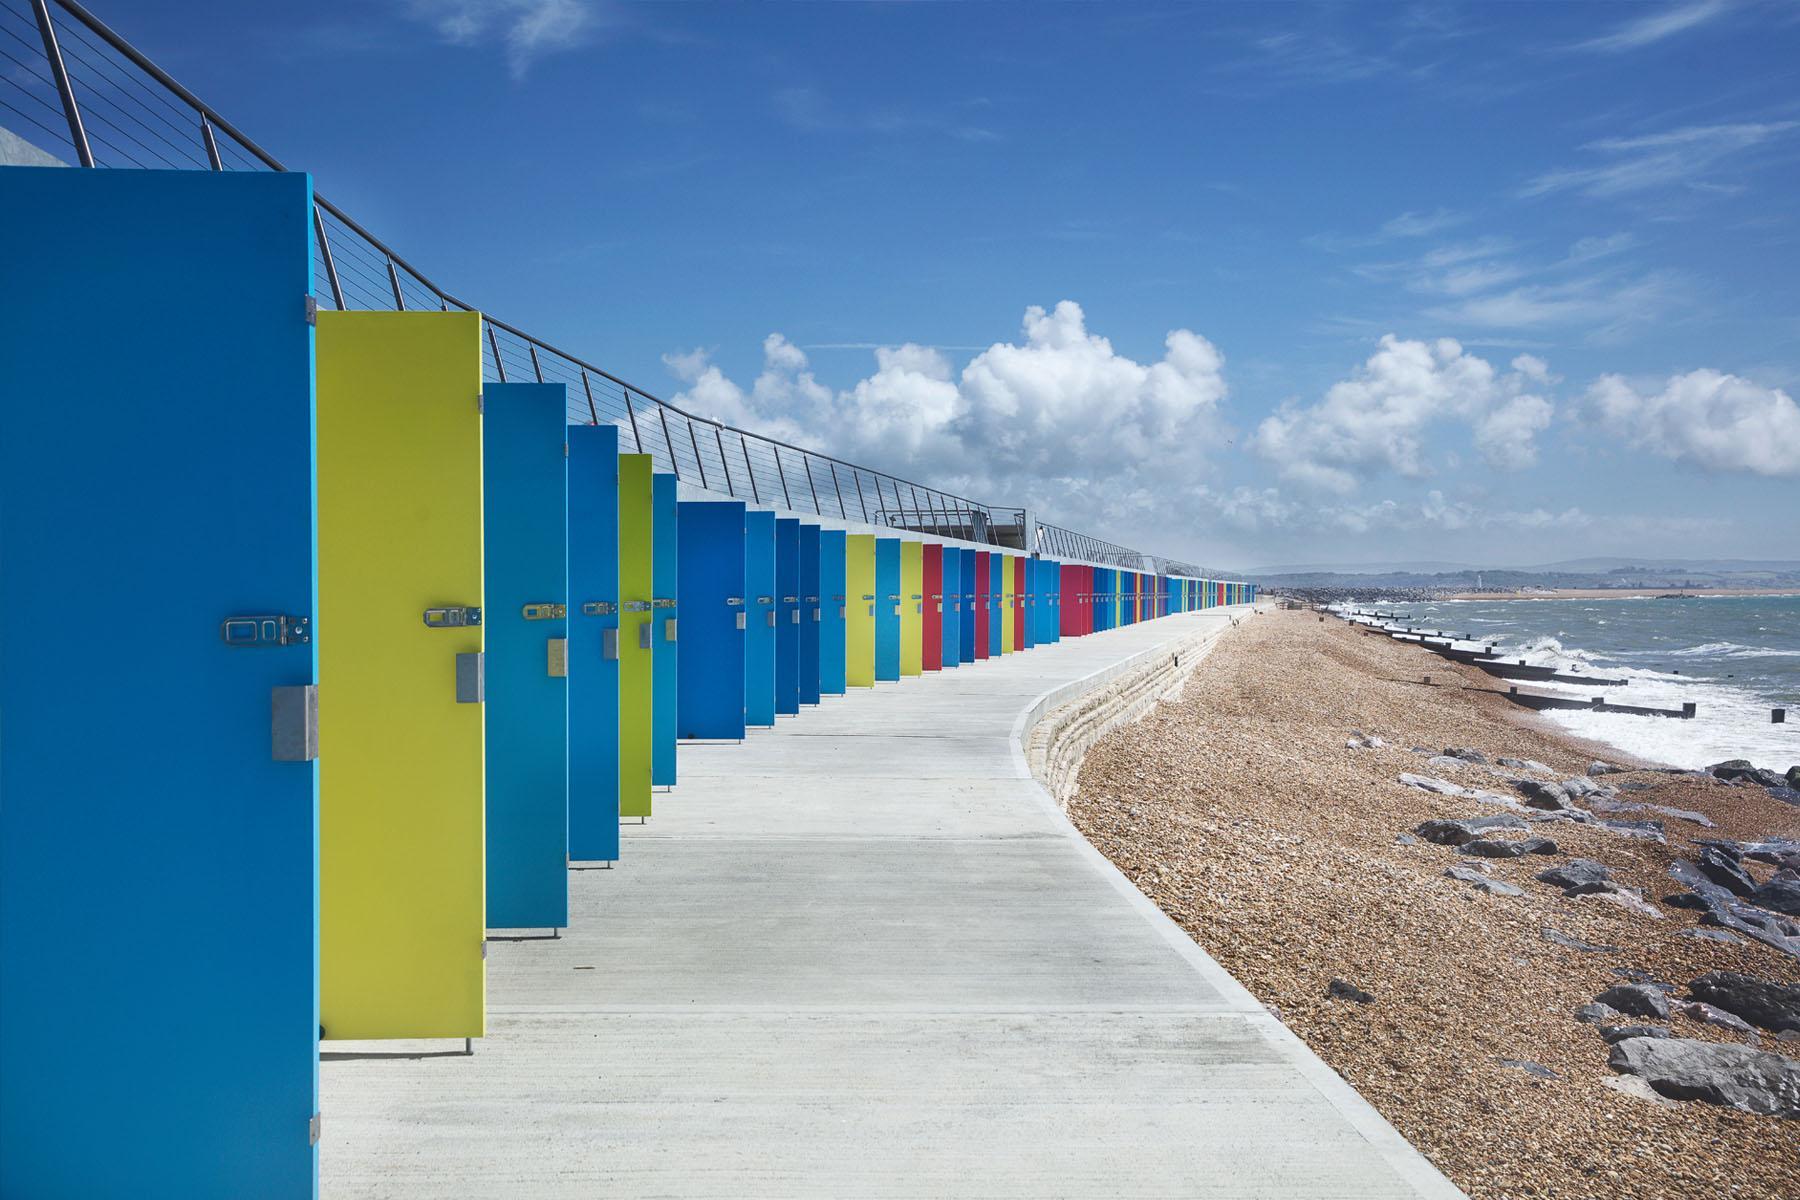 Milford-on-Sea Beach Huts shortlisted for host of awards